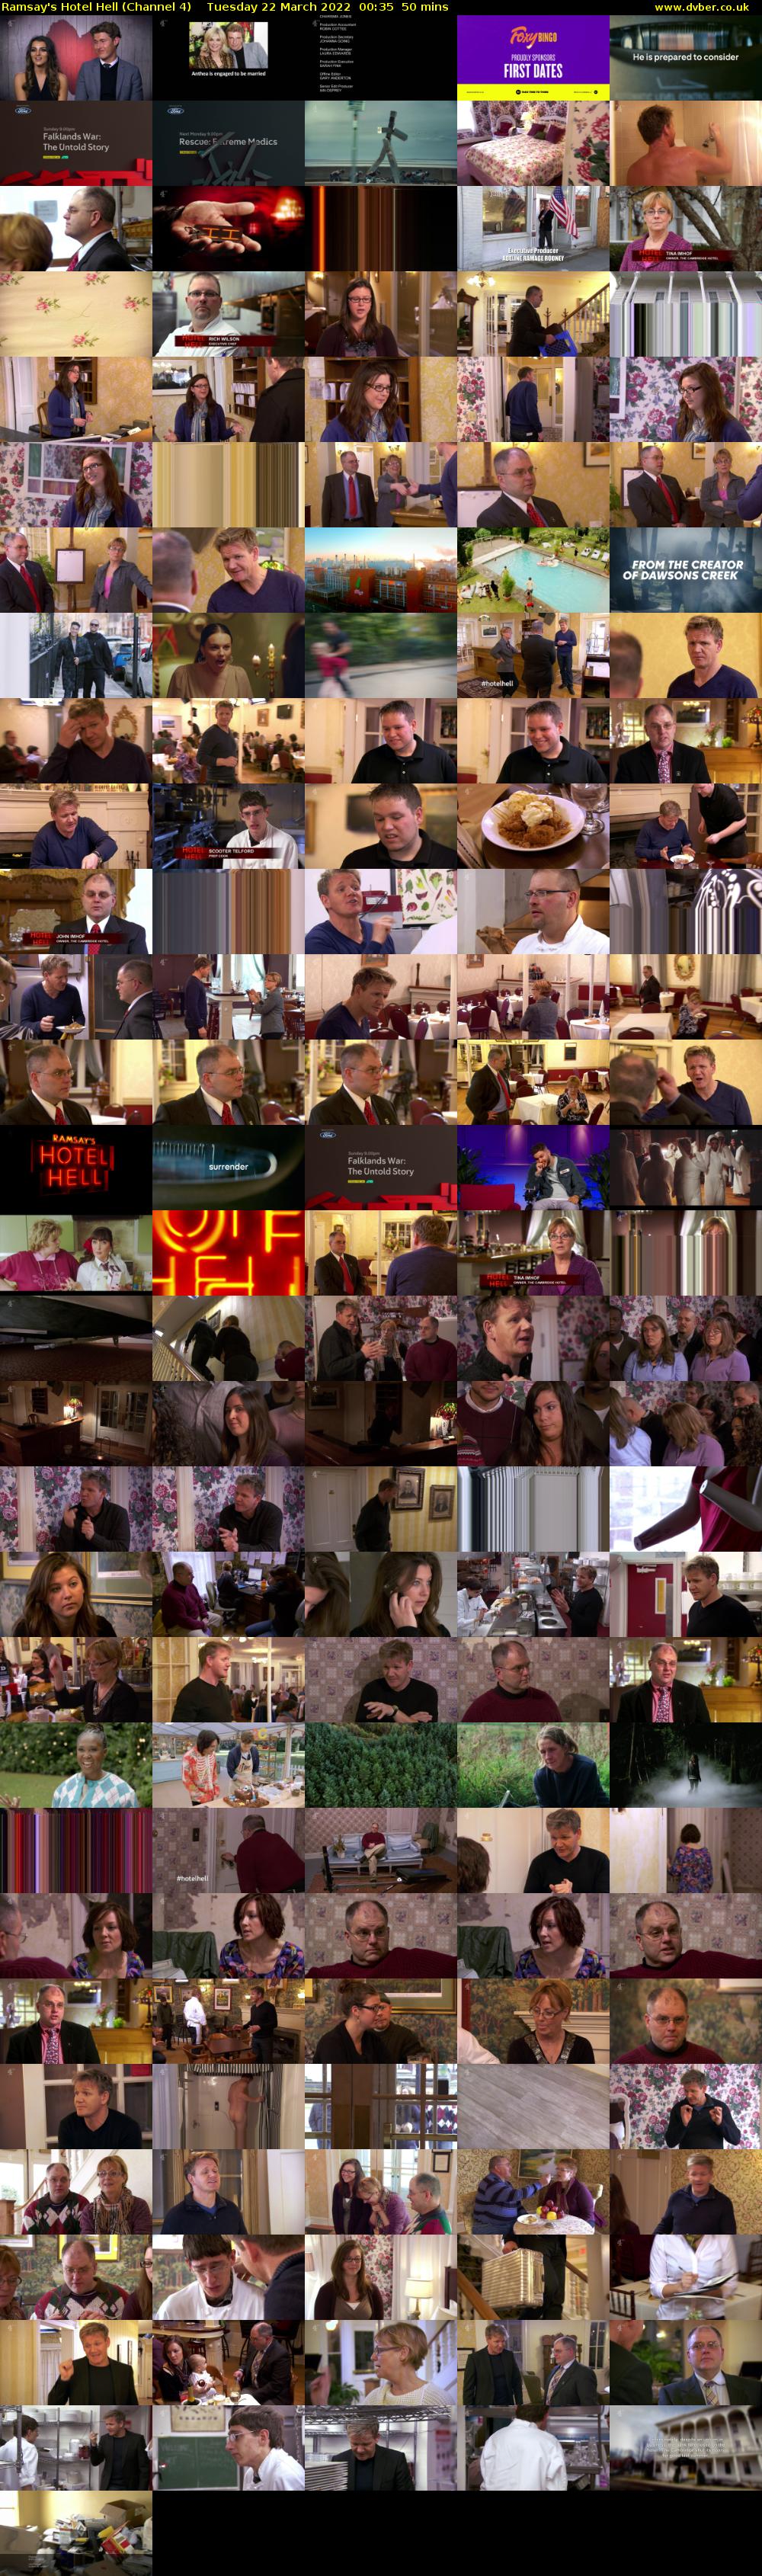 Ramsay's Hotel Hell (Channel 4) Tuesday 22 March 2022 00:35 - 01:25